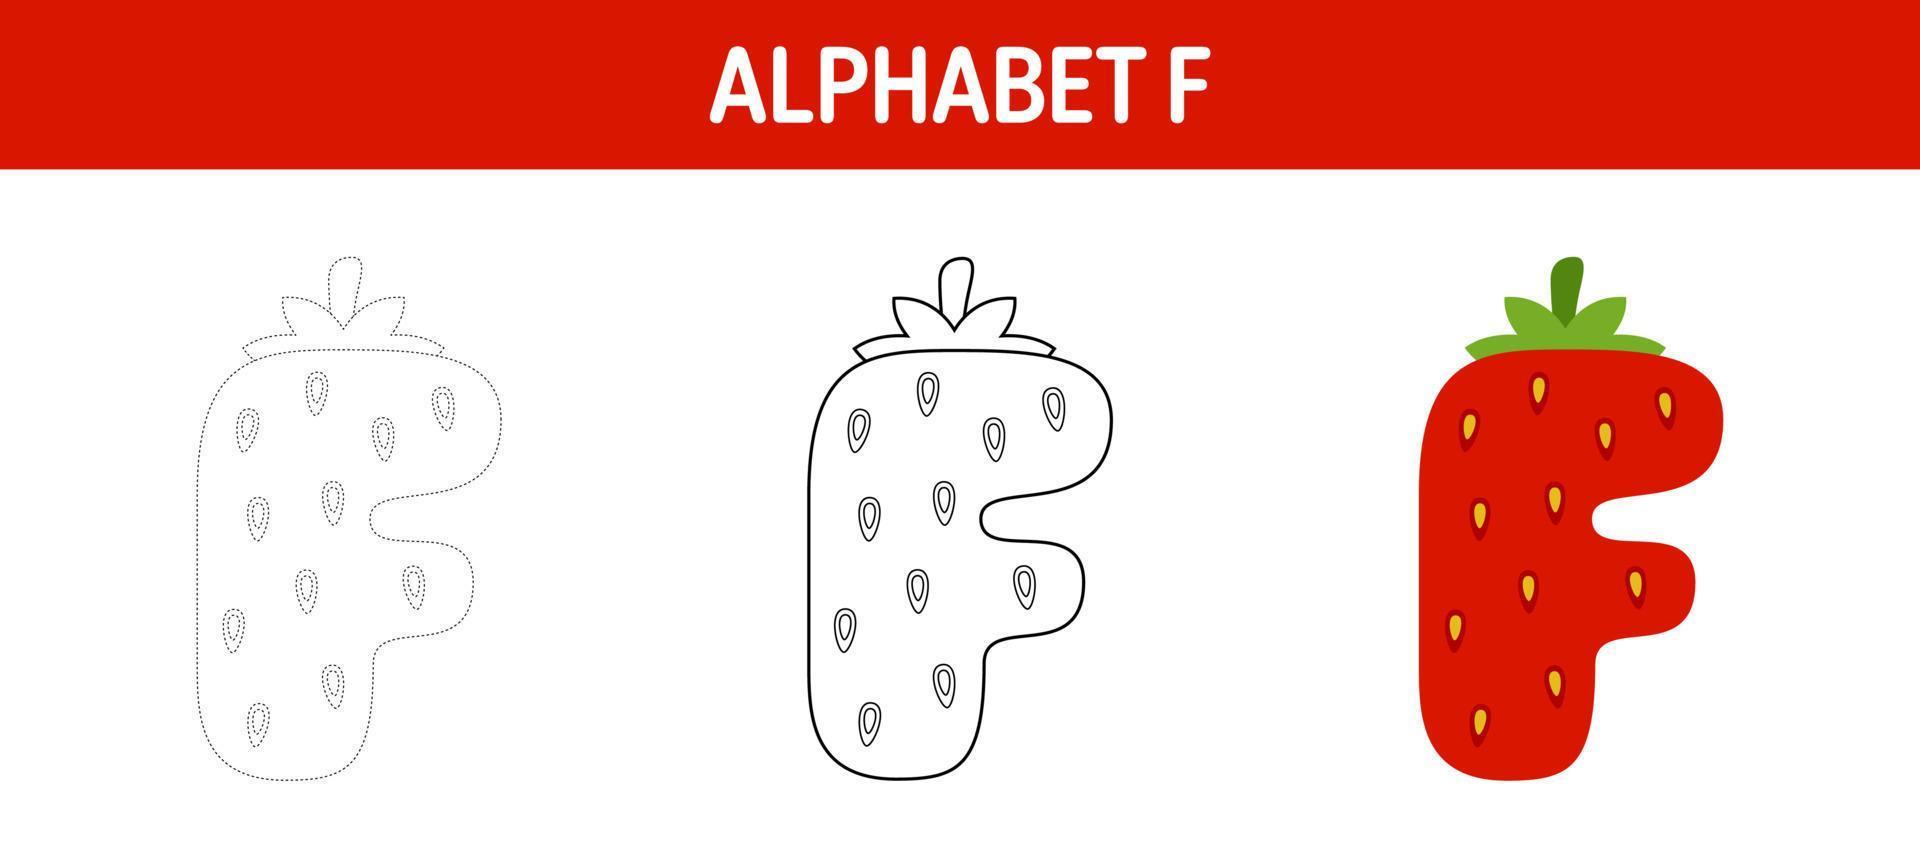 Alphabet F tracing and coloring worksheet for kids vector